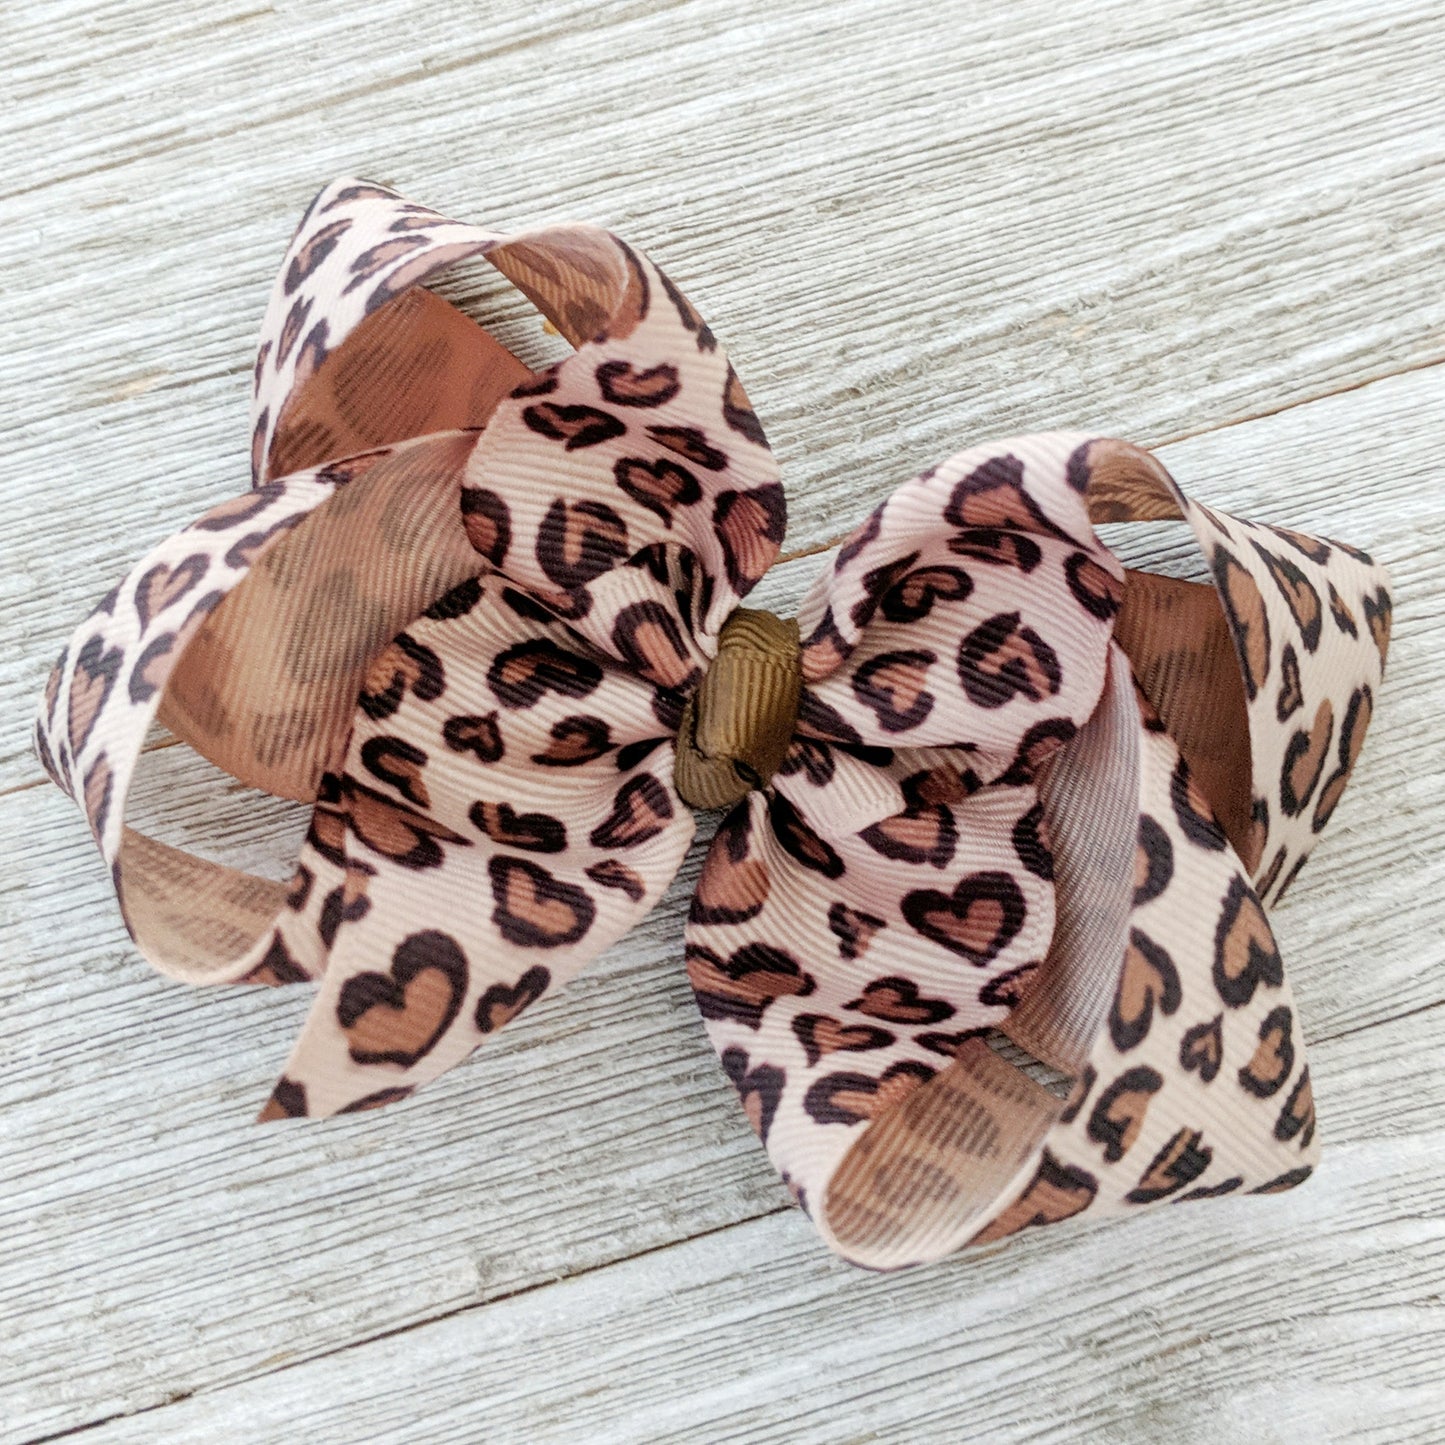 6" Leopard Ribbon Hair Bow out